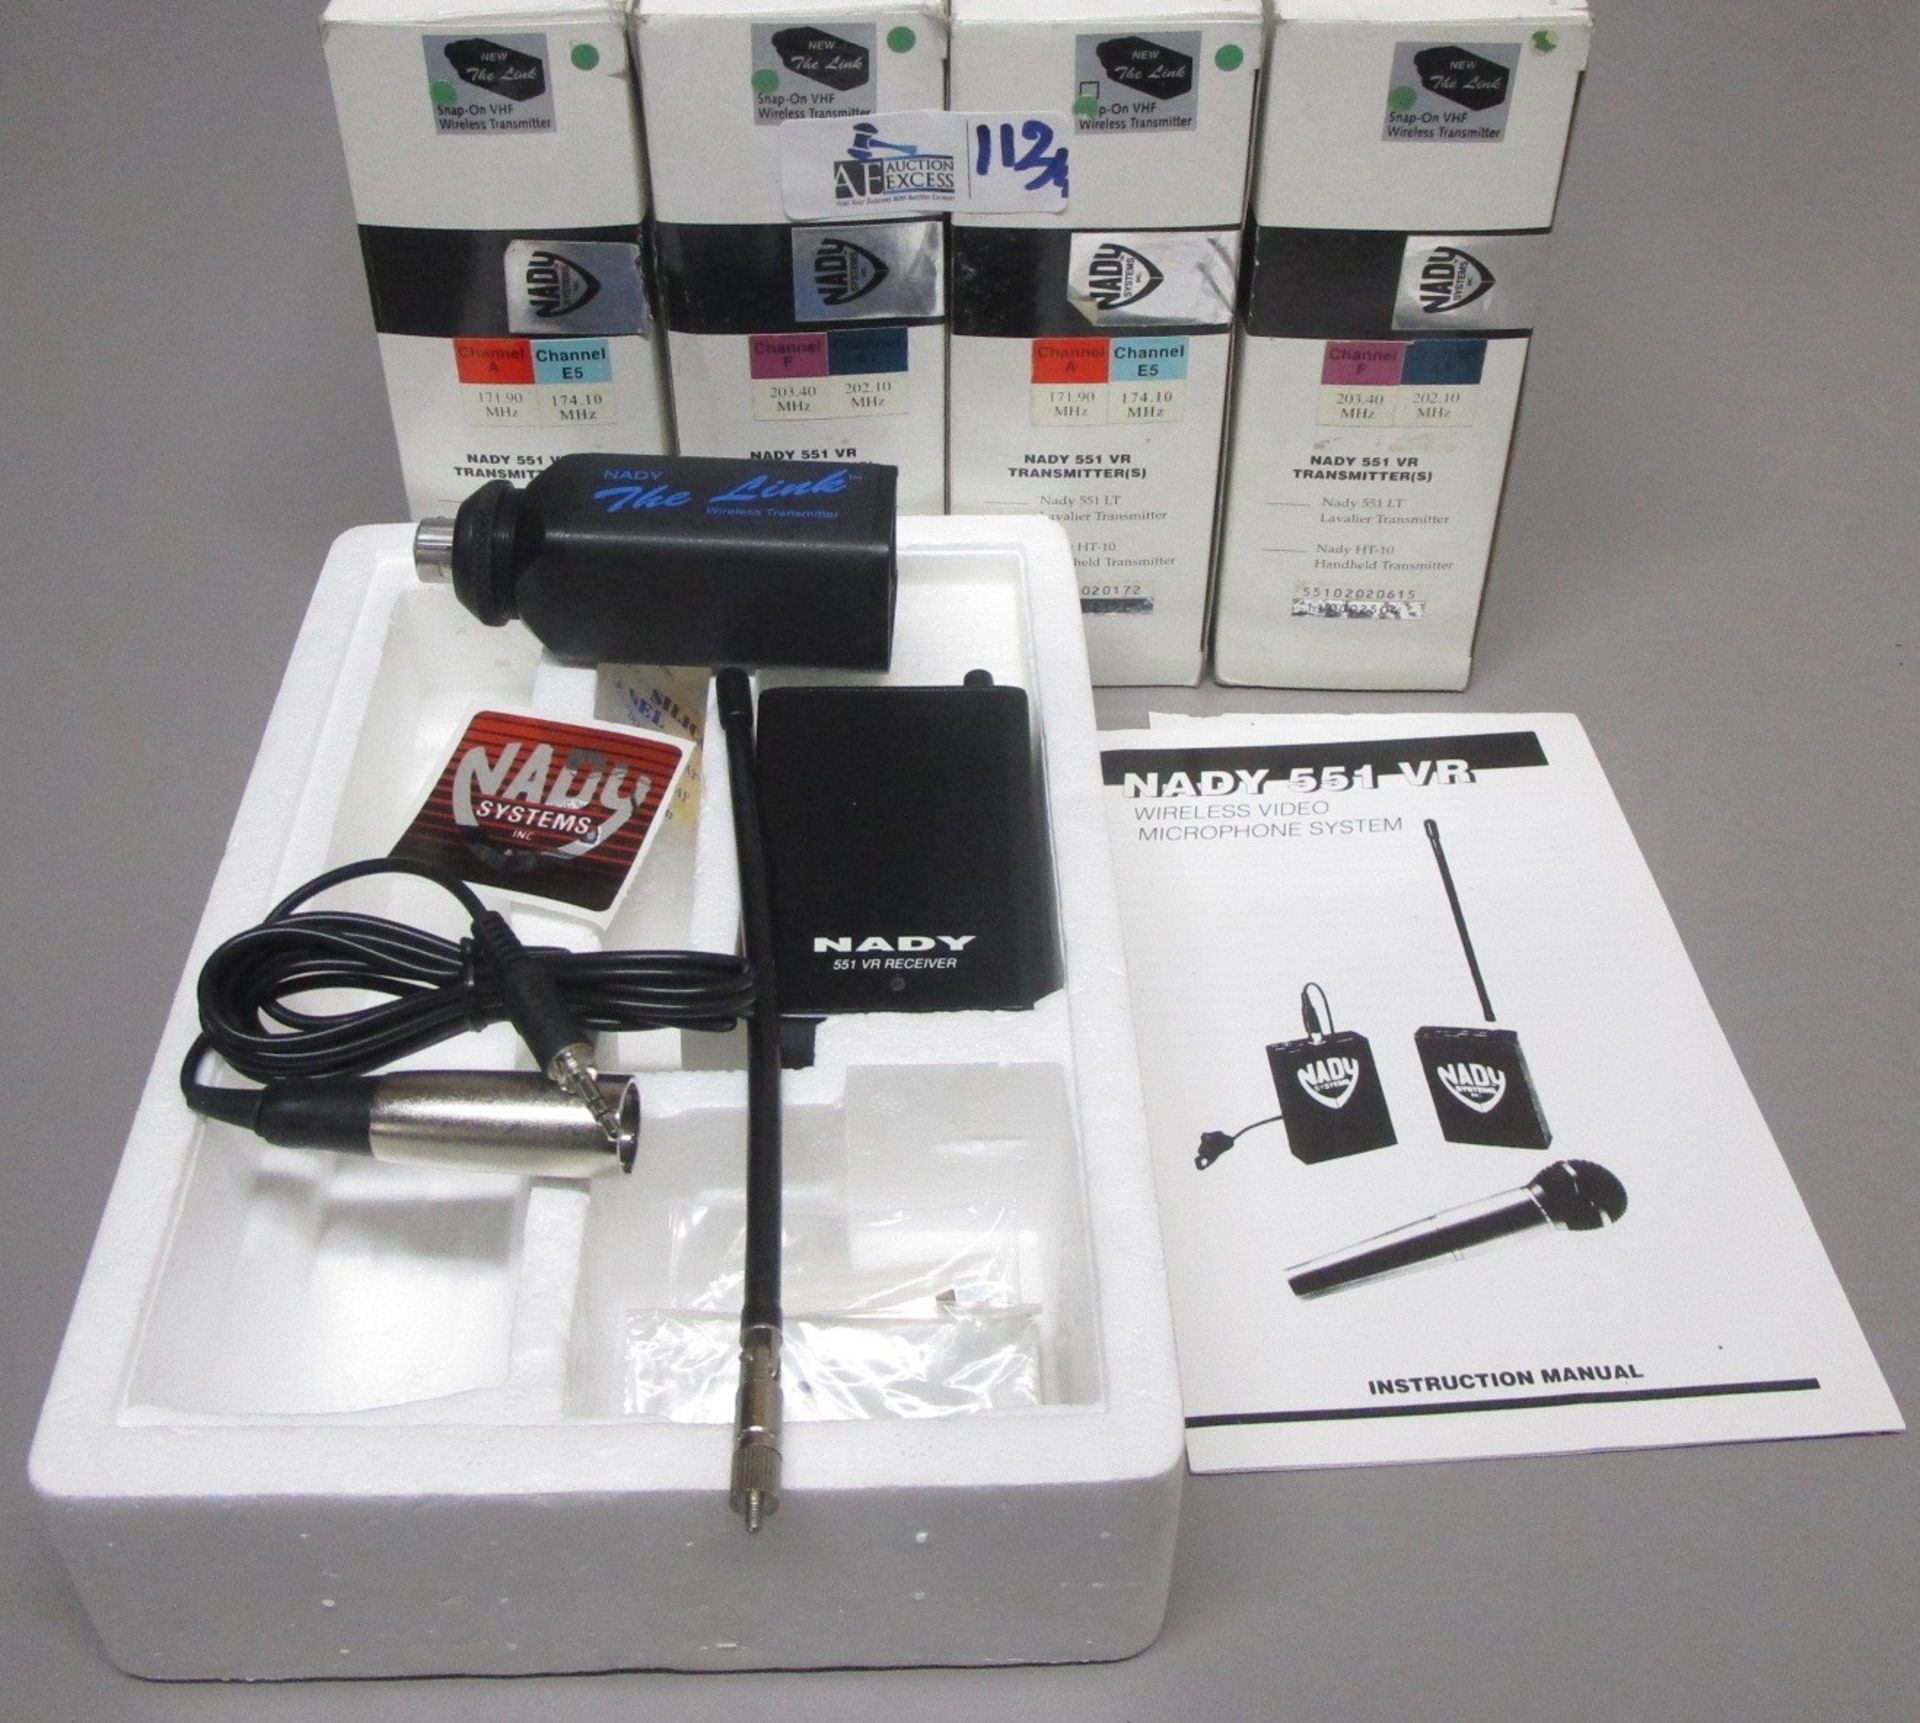 LOT OF 4 NADY 551 VR WIRELESS VIDEO MIC SYSTEM IN ORIGINAL BOXES - Image 2 of 2